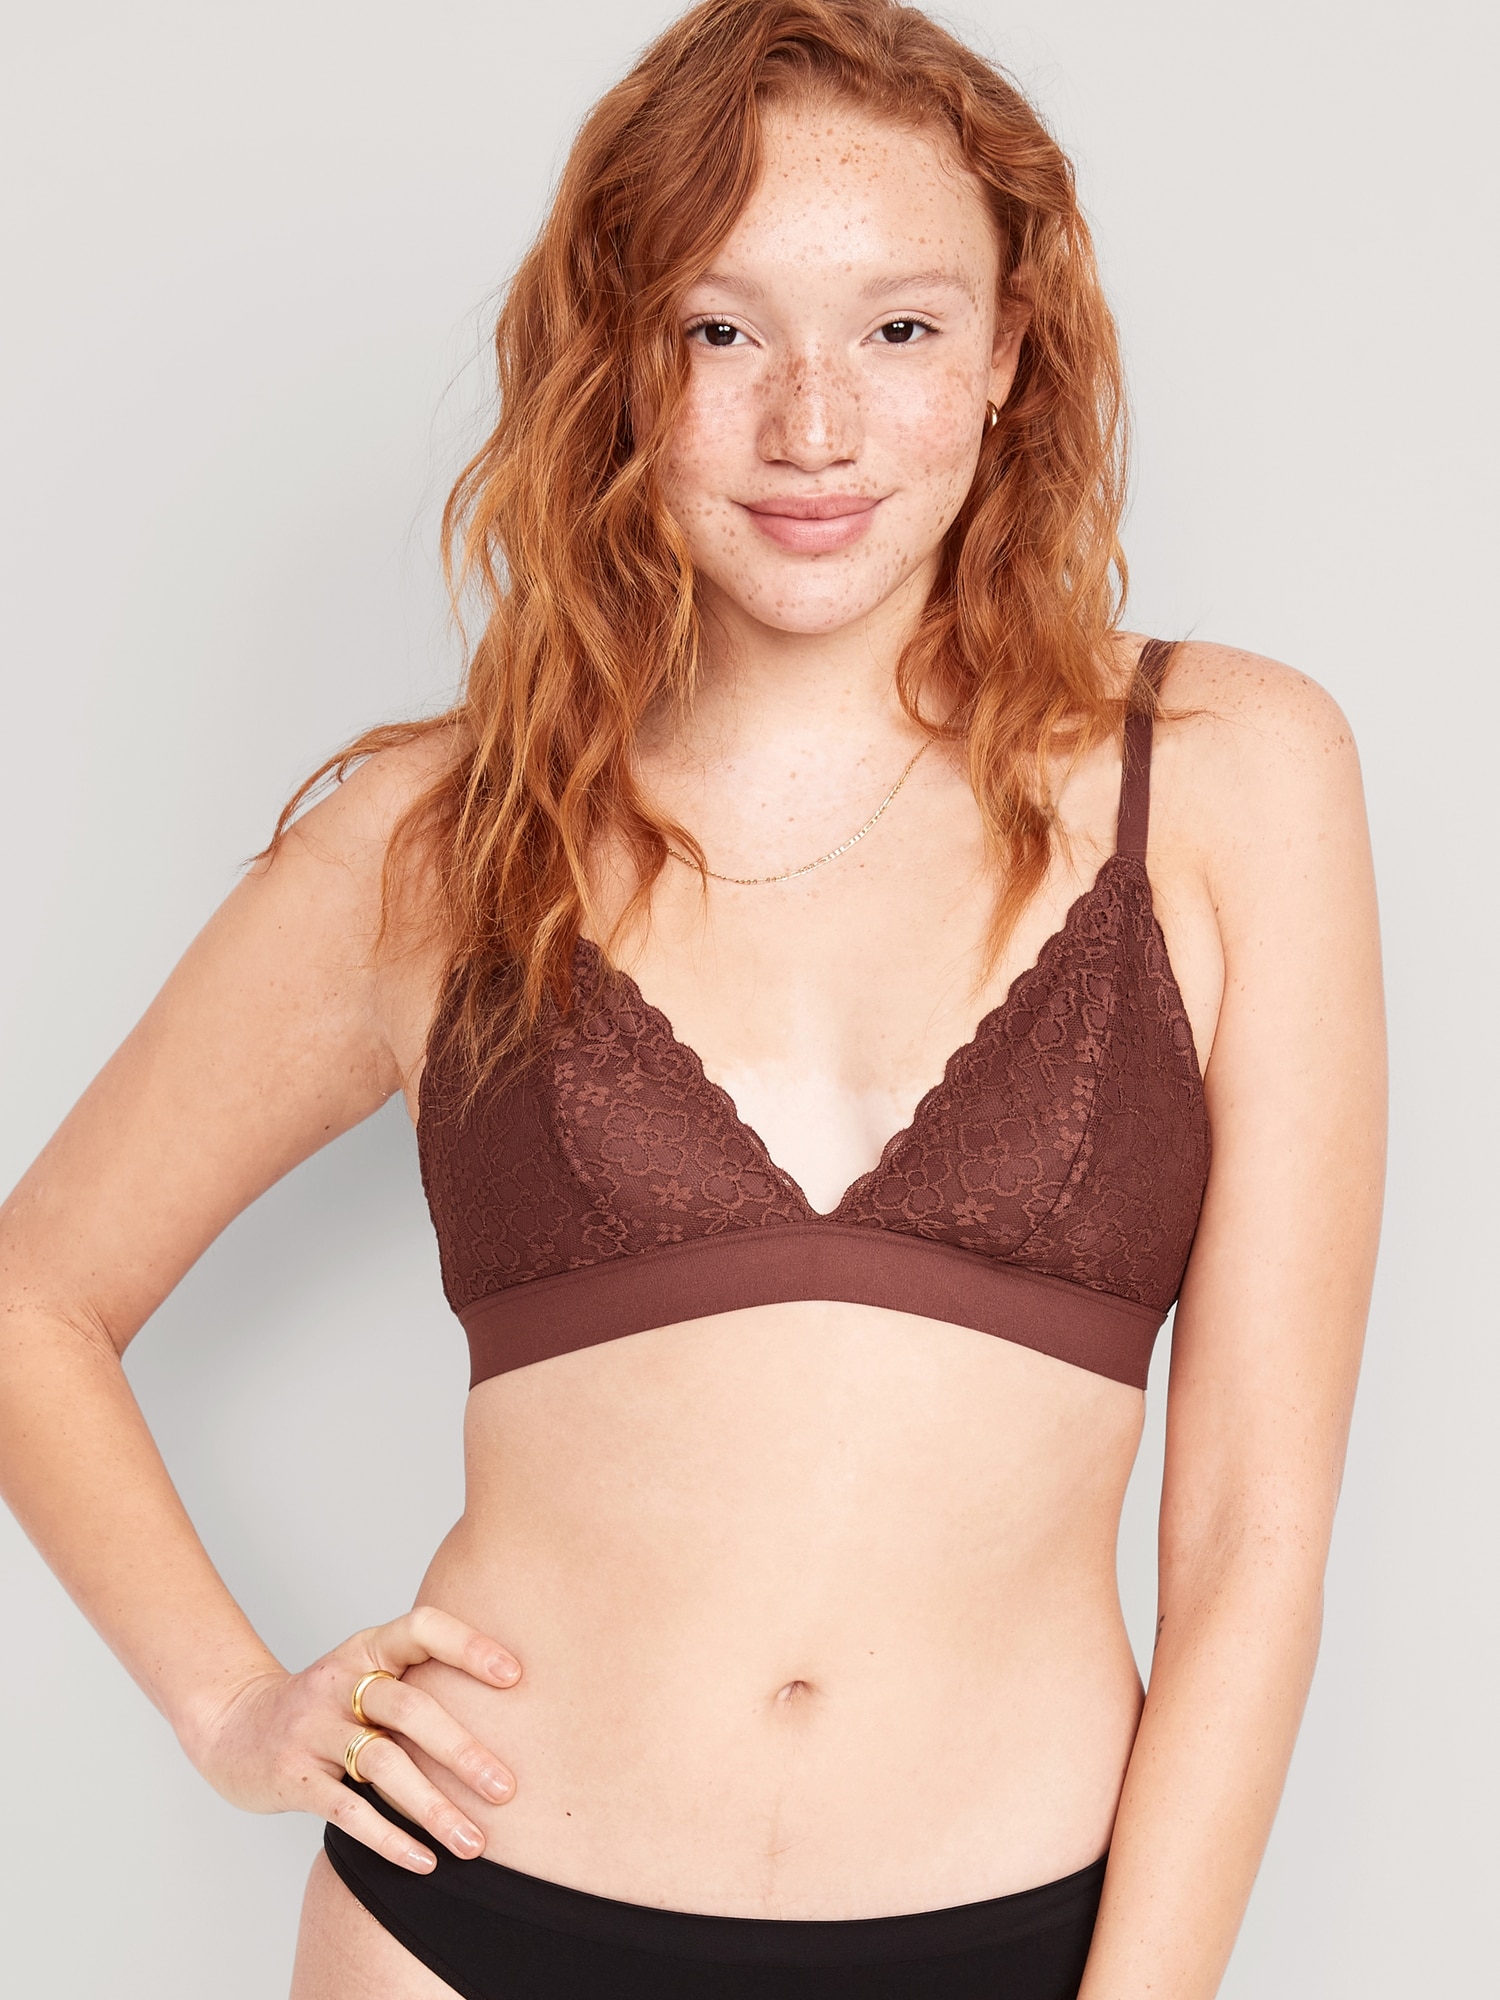 Lace Bralette Top for Women